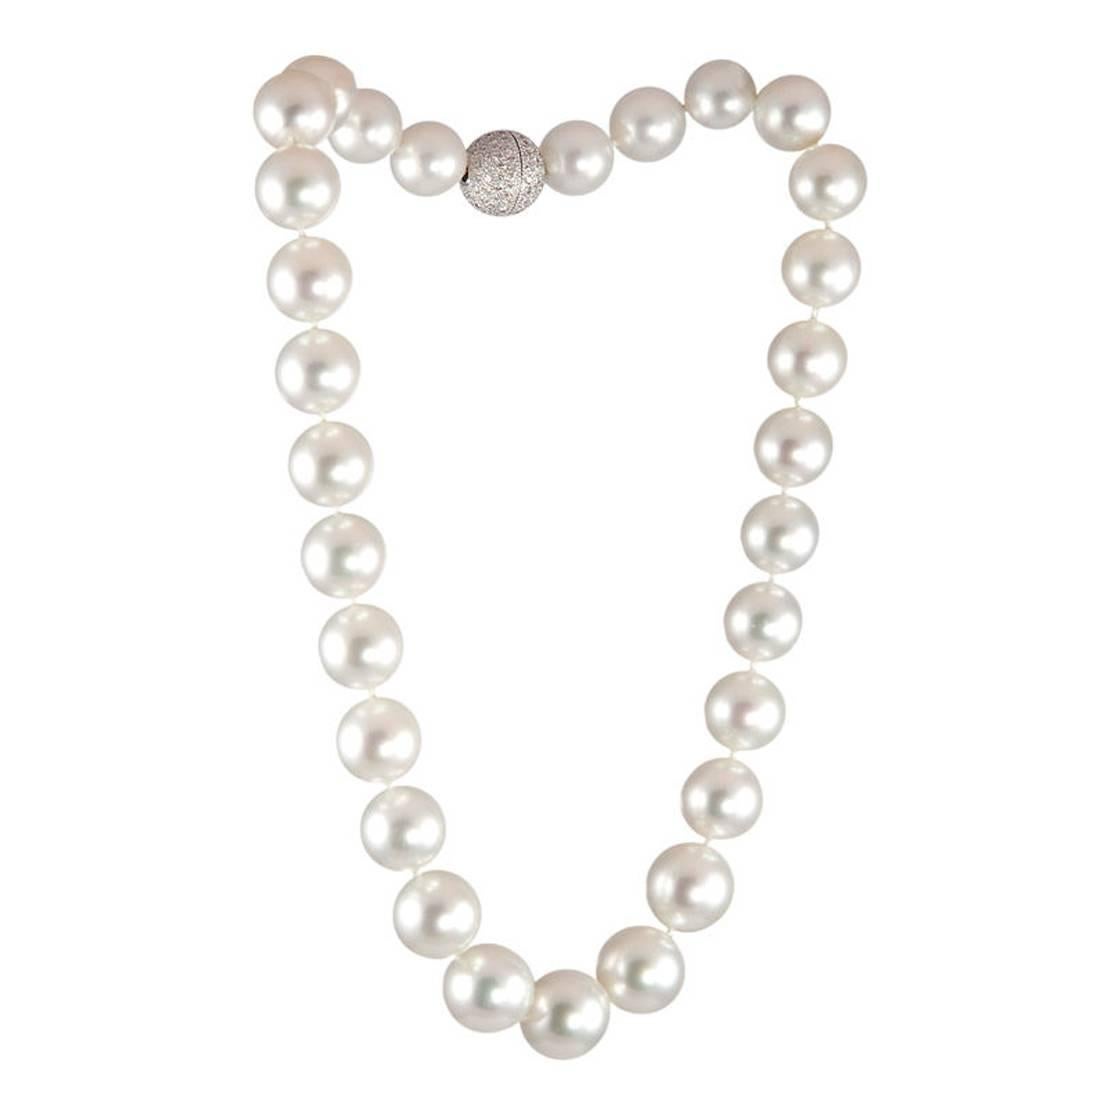 13mm-16mm South Sea Pearl Necklace with 3.15 Carat Diamond Platinum Ball Clasp For Sale